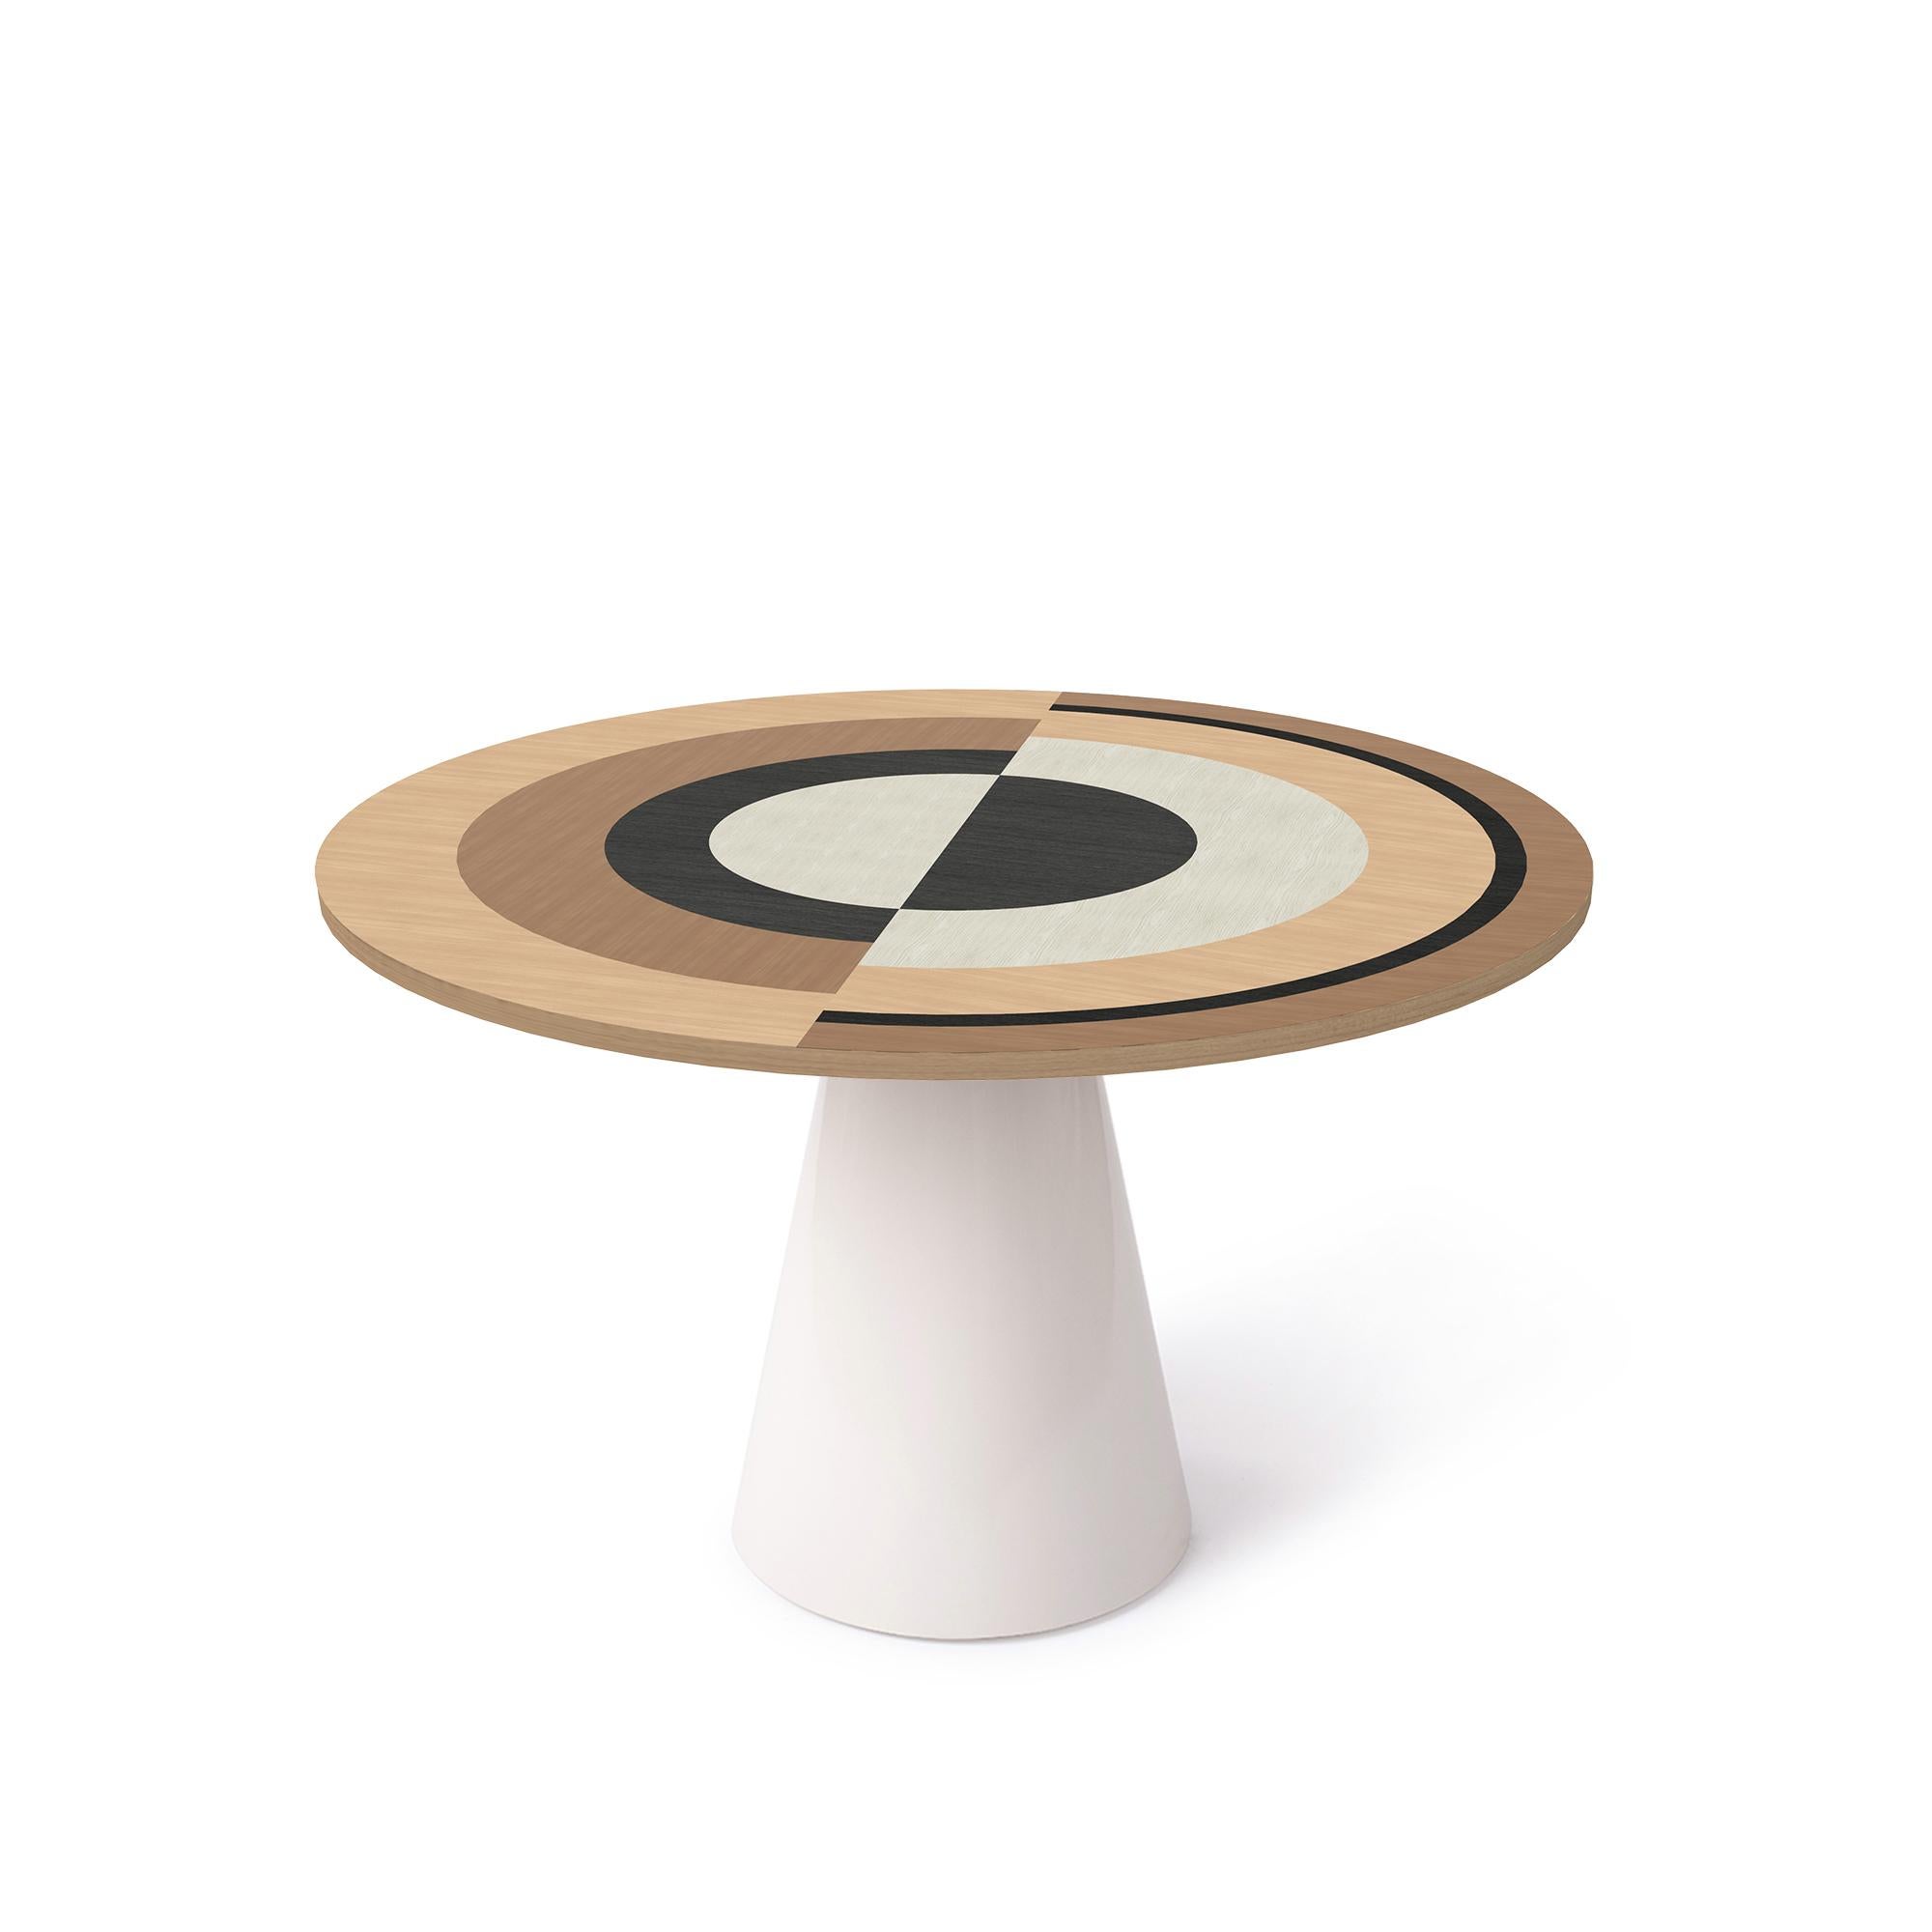 Sonia et Caetera dining table M1 designed by Thomas Dariel
Dimensions: 
Small: Diameter 100 x Height 74 cm 
Medium: Diameter 115 x Height 74 cm 
Large: Diameter 130 x Height 74 cm 
Materials: Top in painted ash veneer, fronts in the matte paint